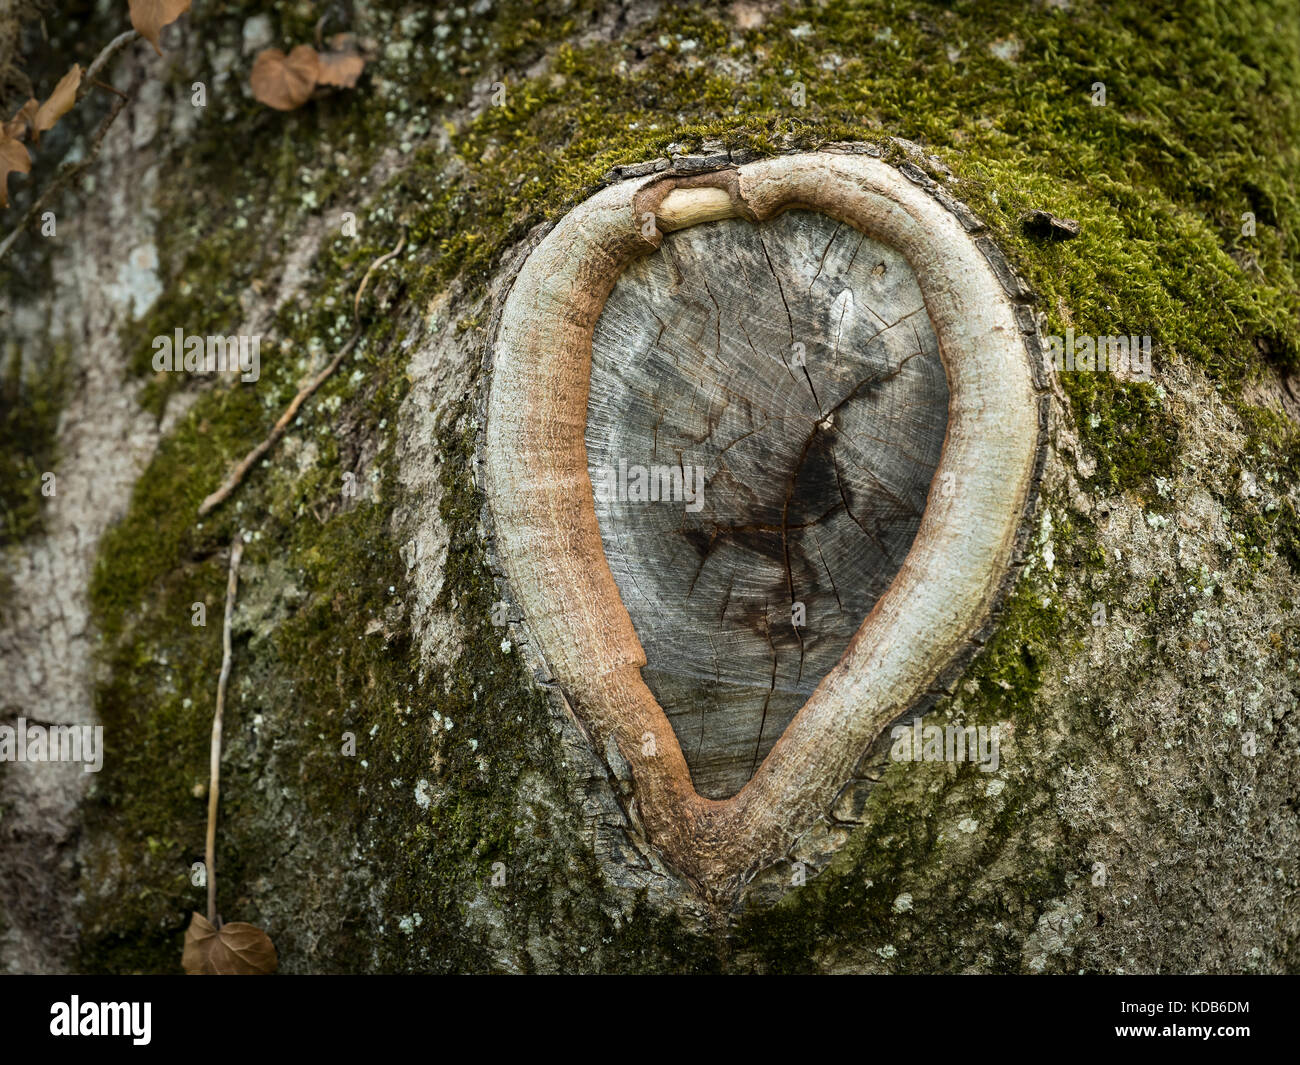 Closeup of a knothole of an old tree in the shape of a heart Stock Photo